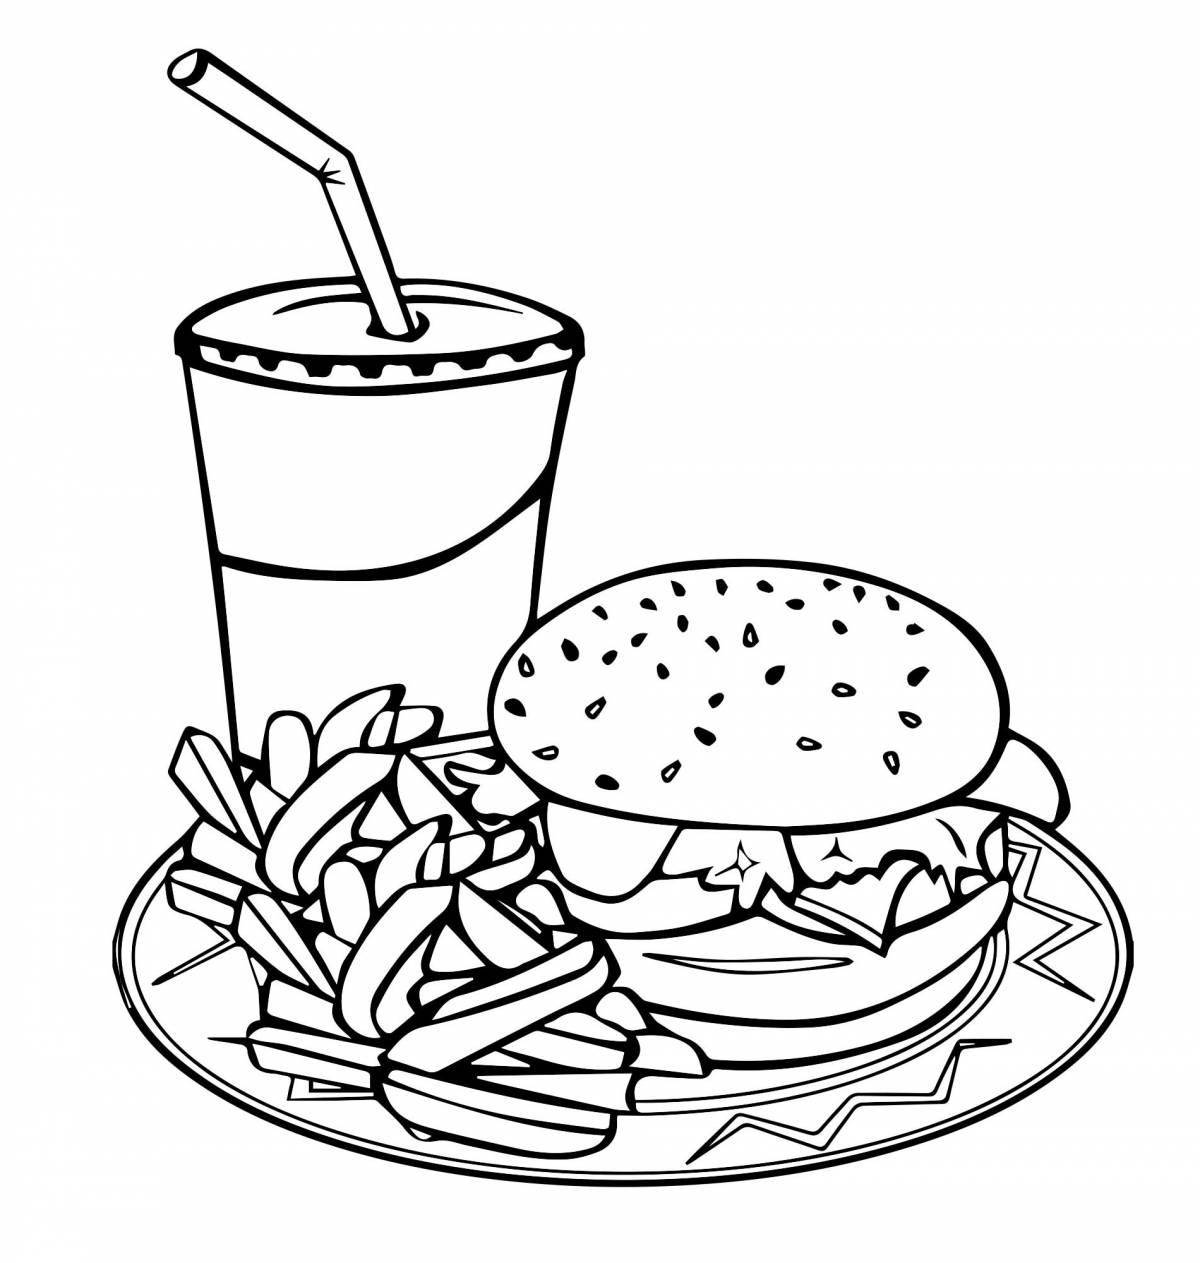 Inviting burger coloring pages for kids